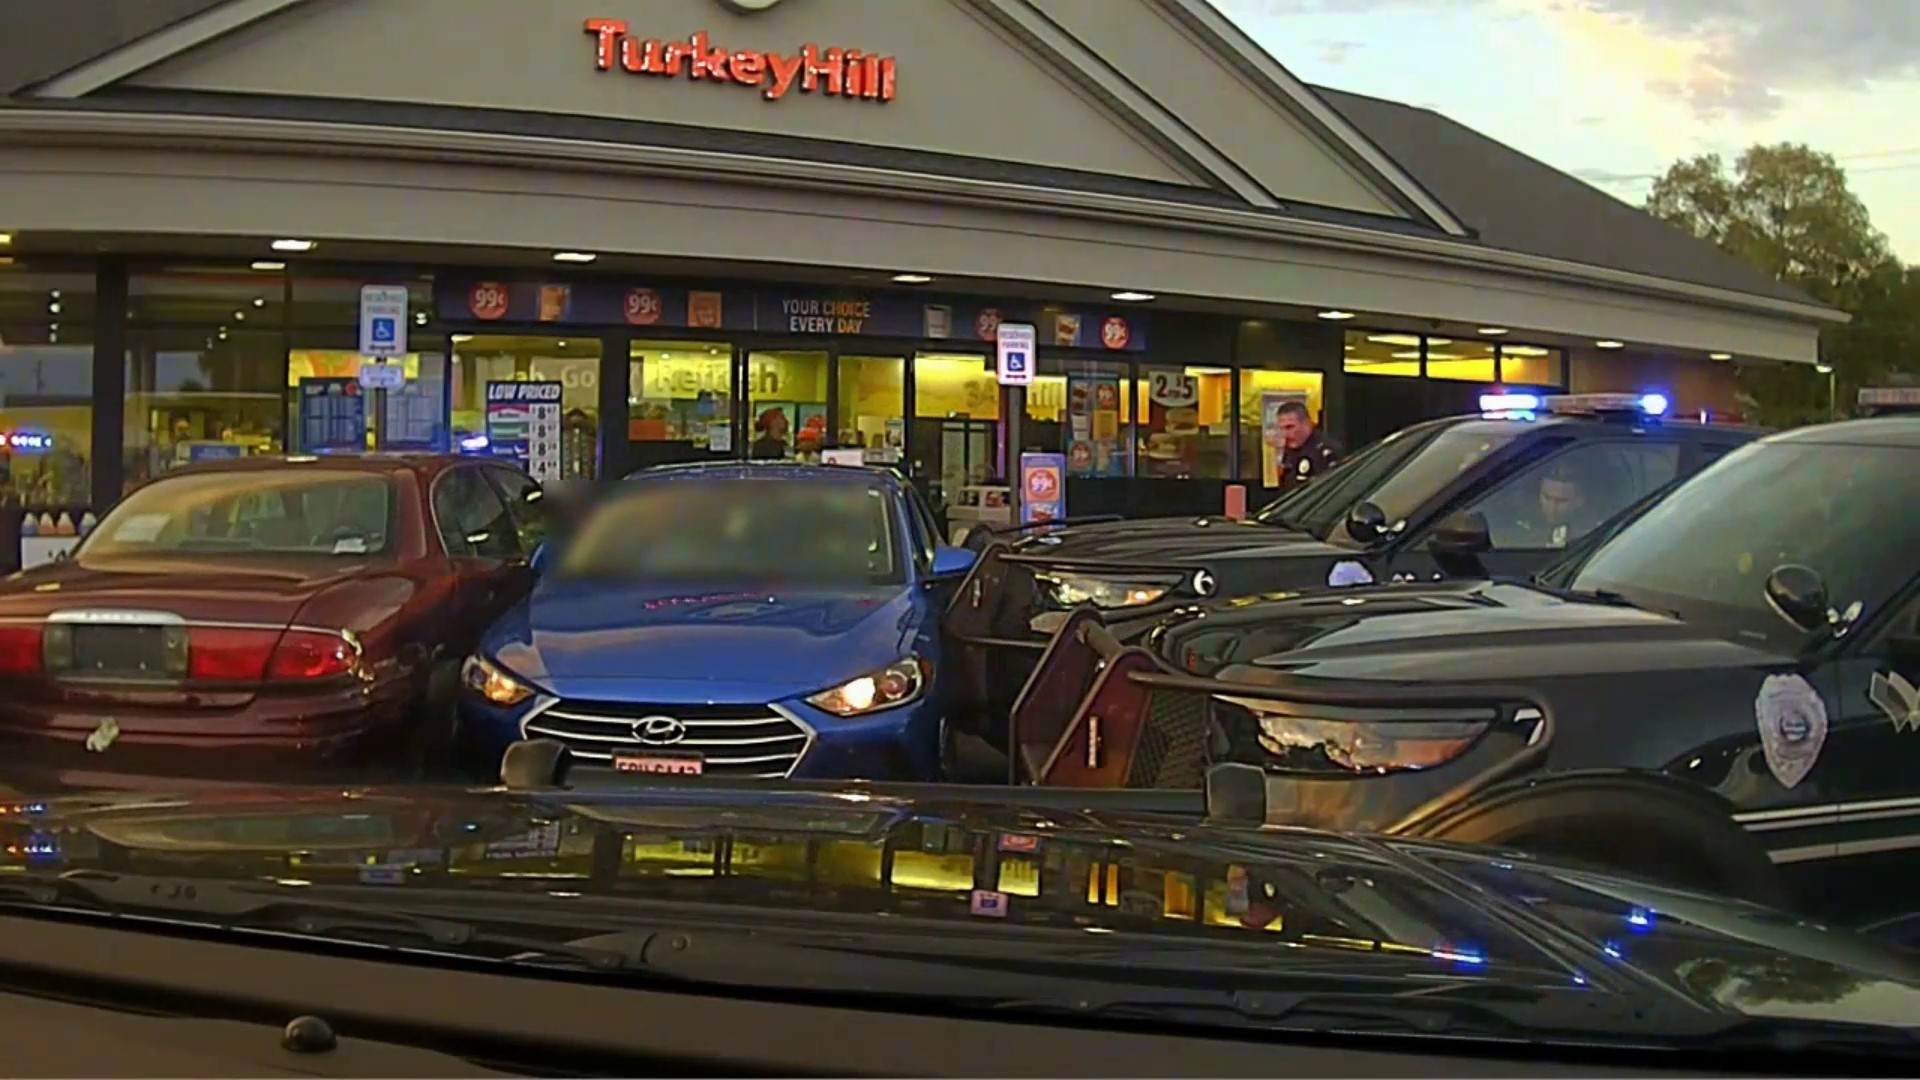 Juveniles were caught at a Turkey Hill gas station on Monday. Video from two dash camera shows the juveniles ramming into police cruisers in an attempt to escape